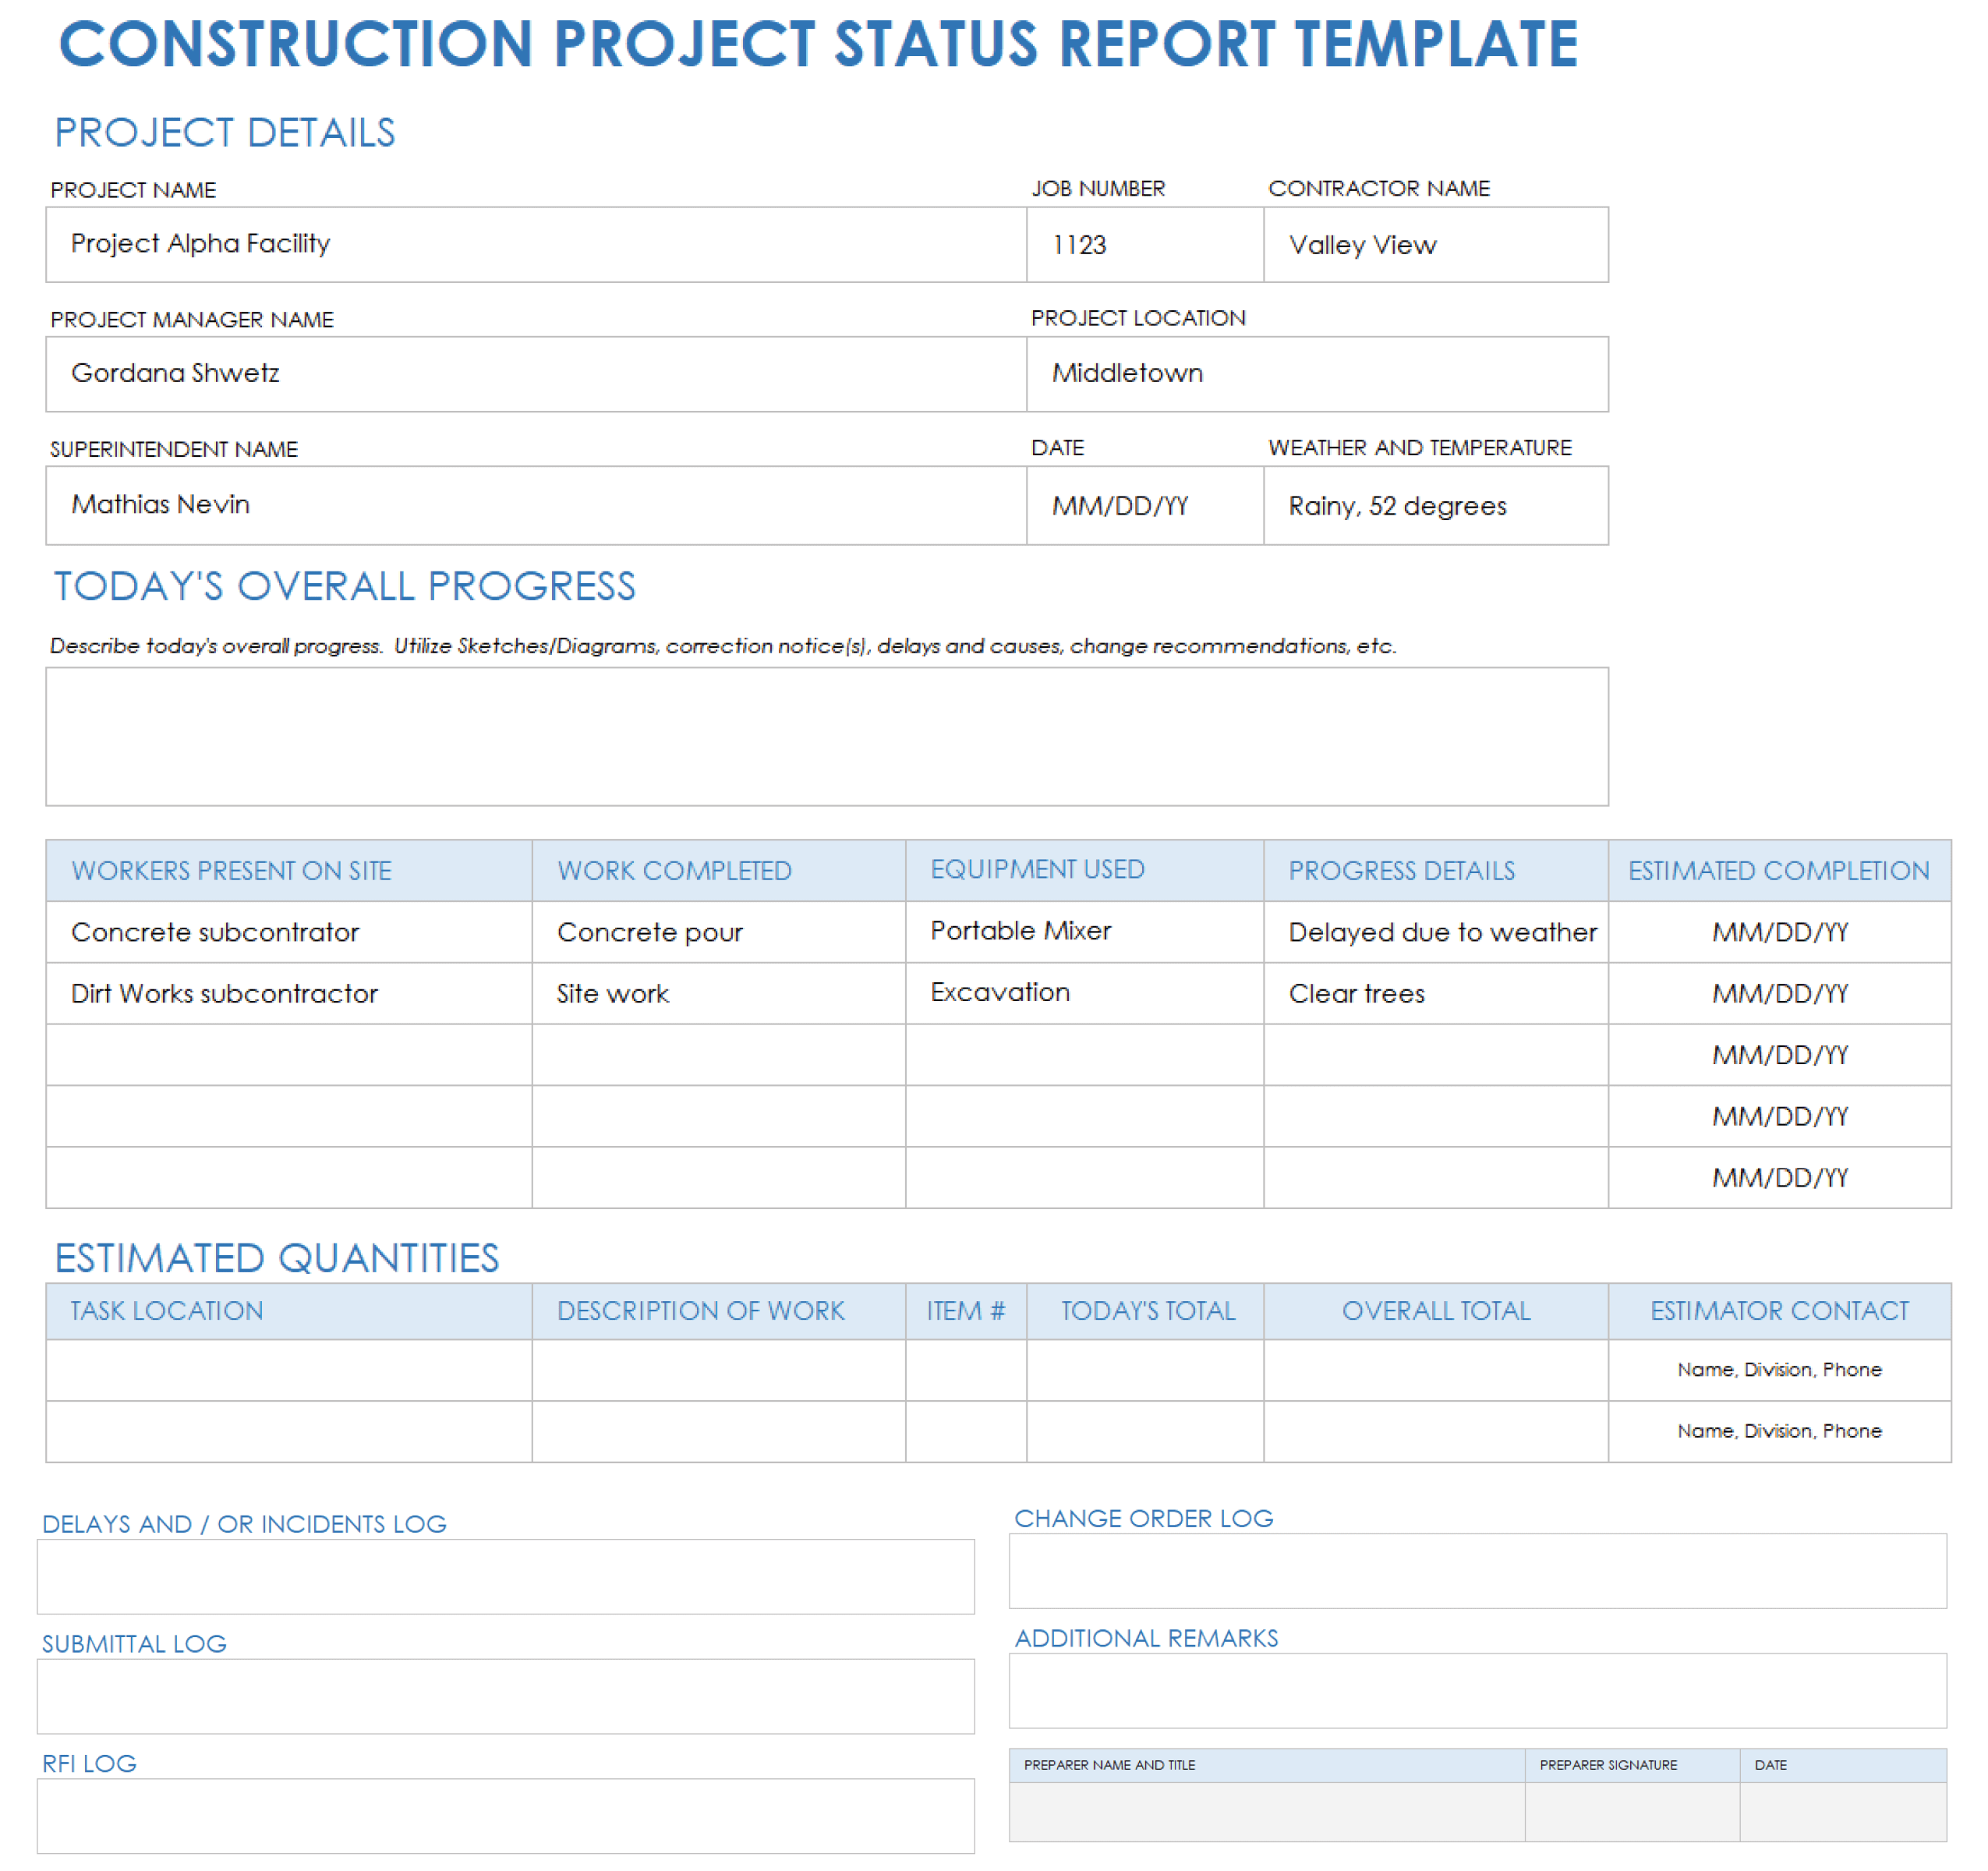 Construction Project Status Report Template